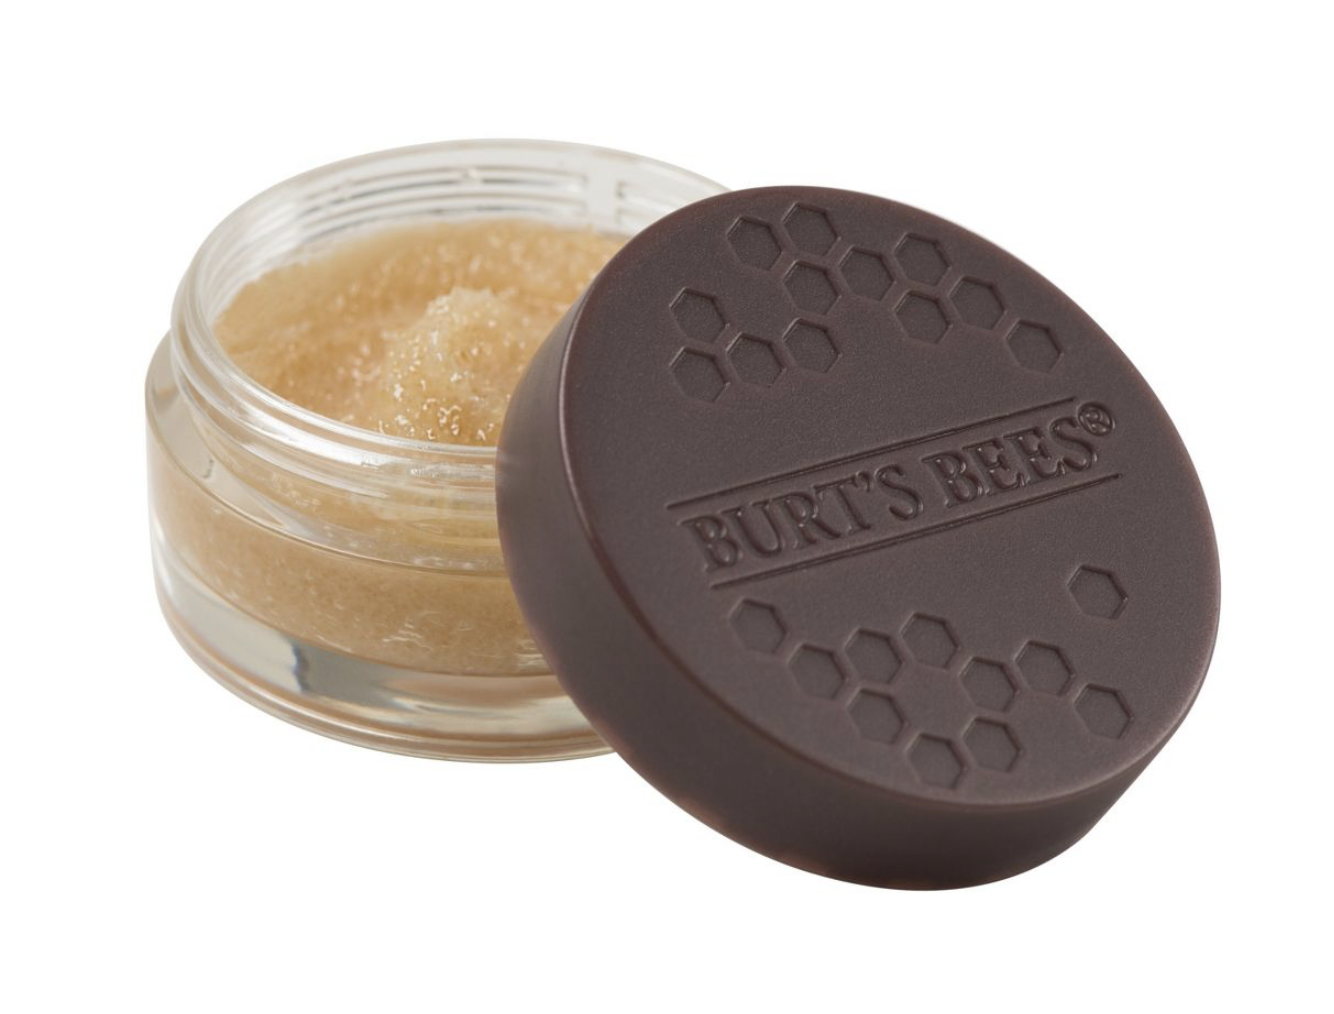 Burt's Bees Natural Conditioning Lip Scrub with Exfoliating Honey Crystals